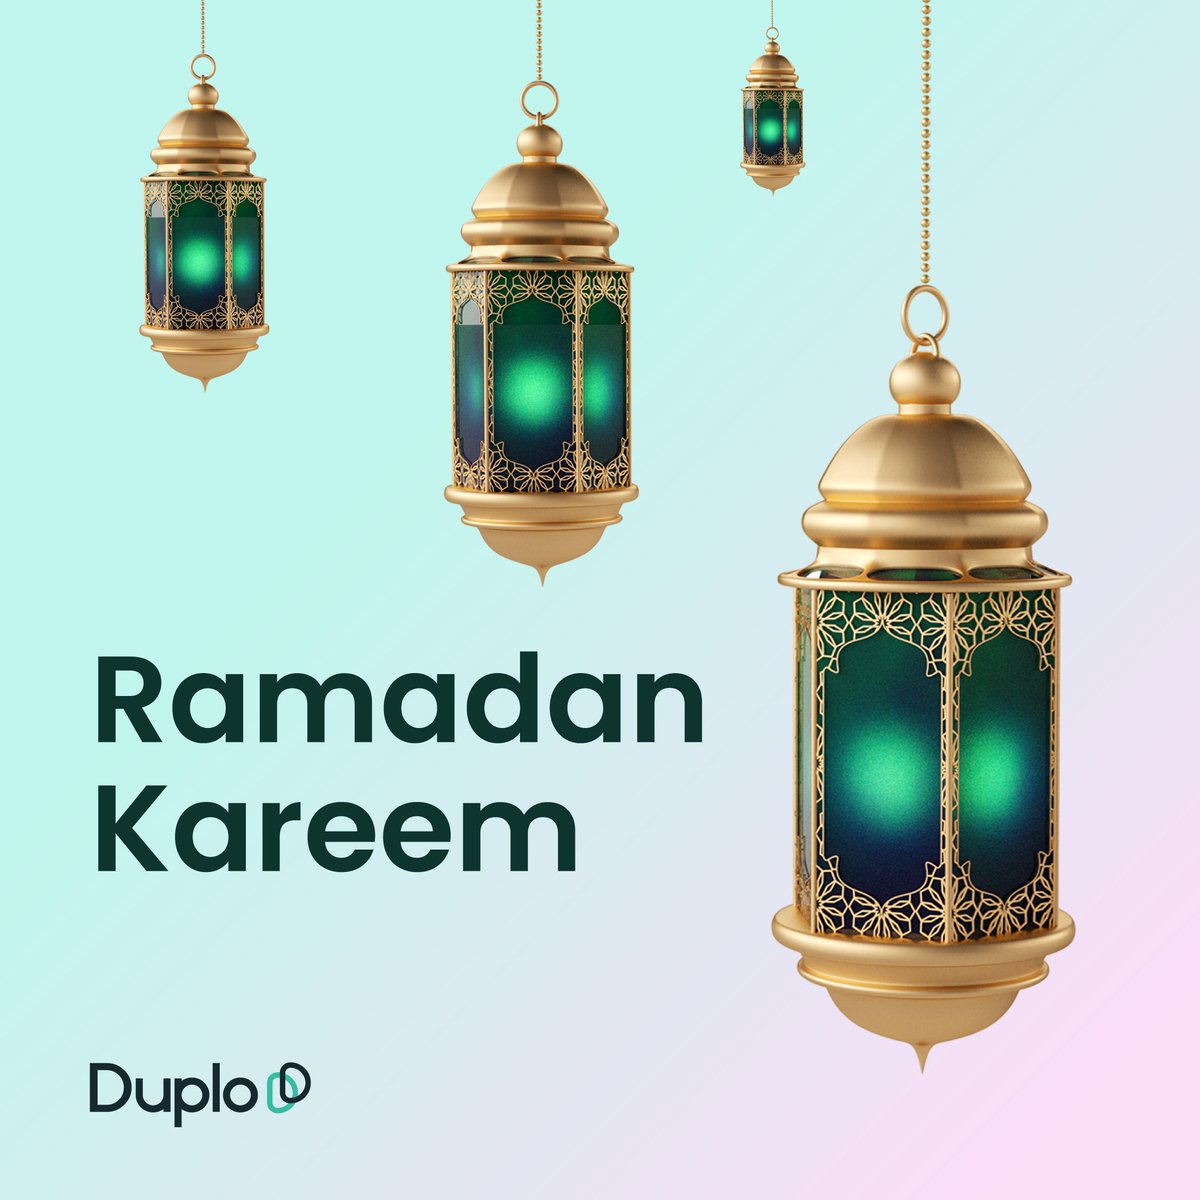 Duplo is wishing you and your loved ones a blessed Ramadan filled with peace, joy, and countless blessings. May this season replenish you and your loved ones.